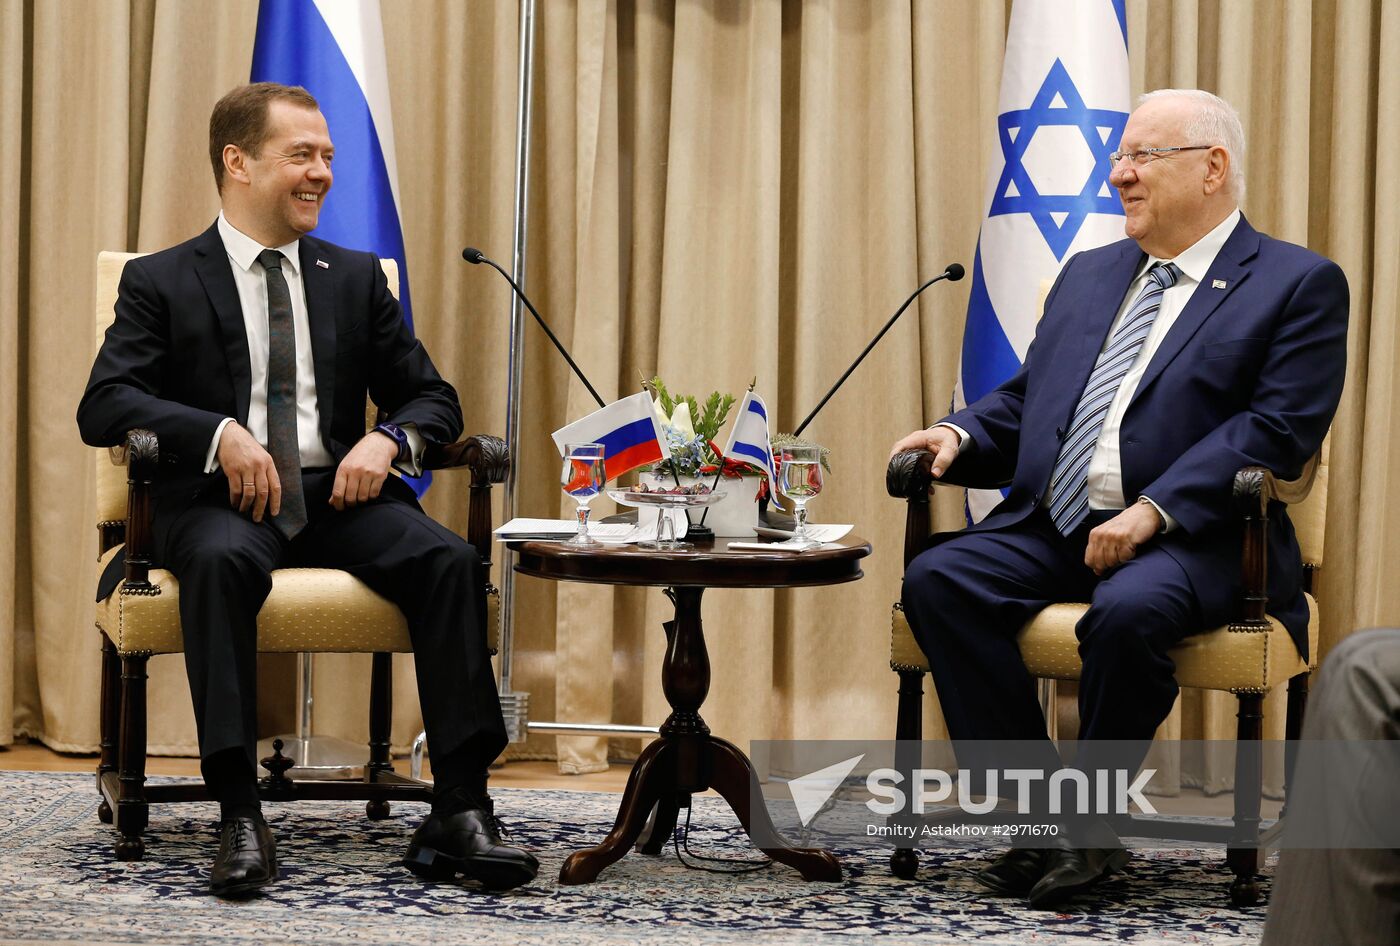 Russian Prime Minister Dmitry Medvedev's official visit to Israel